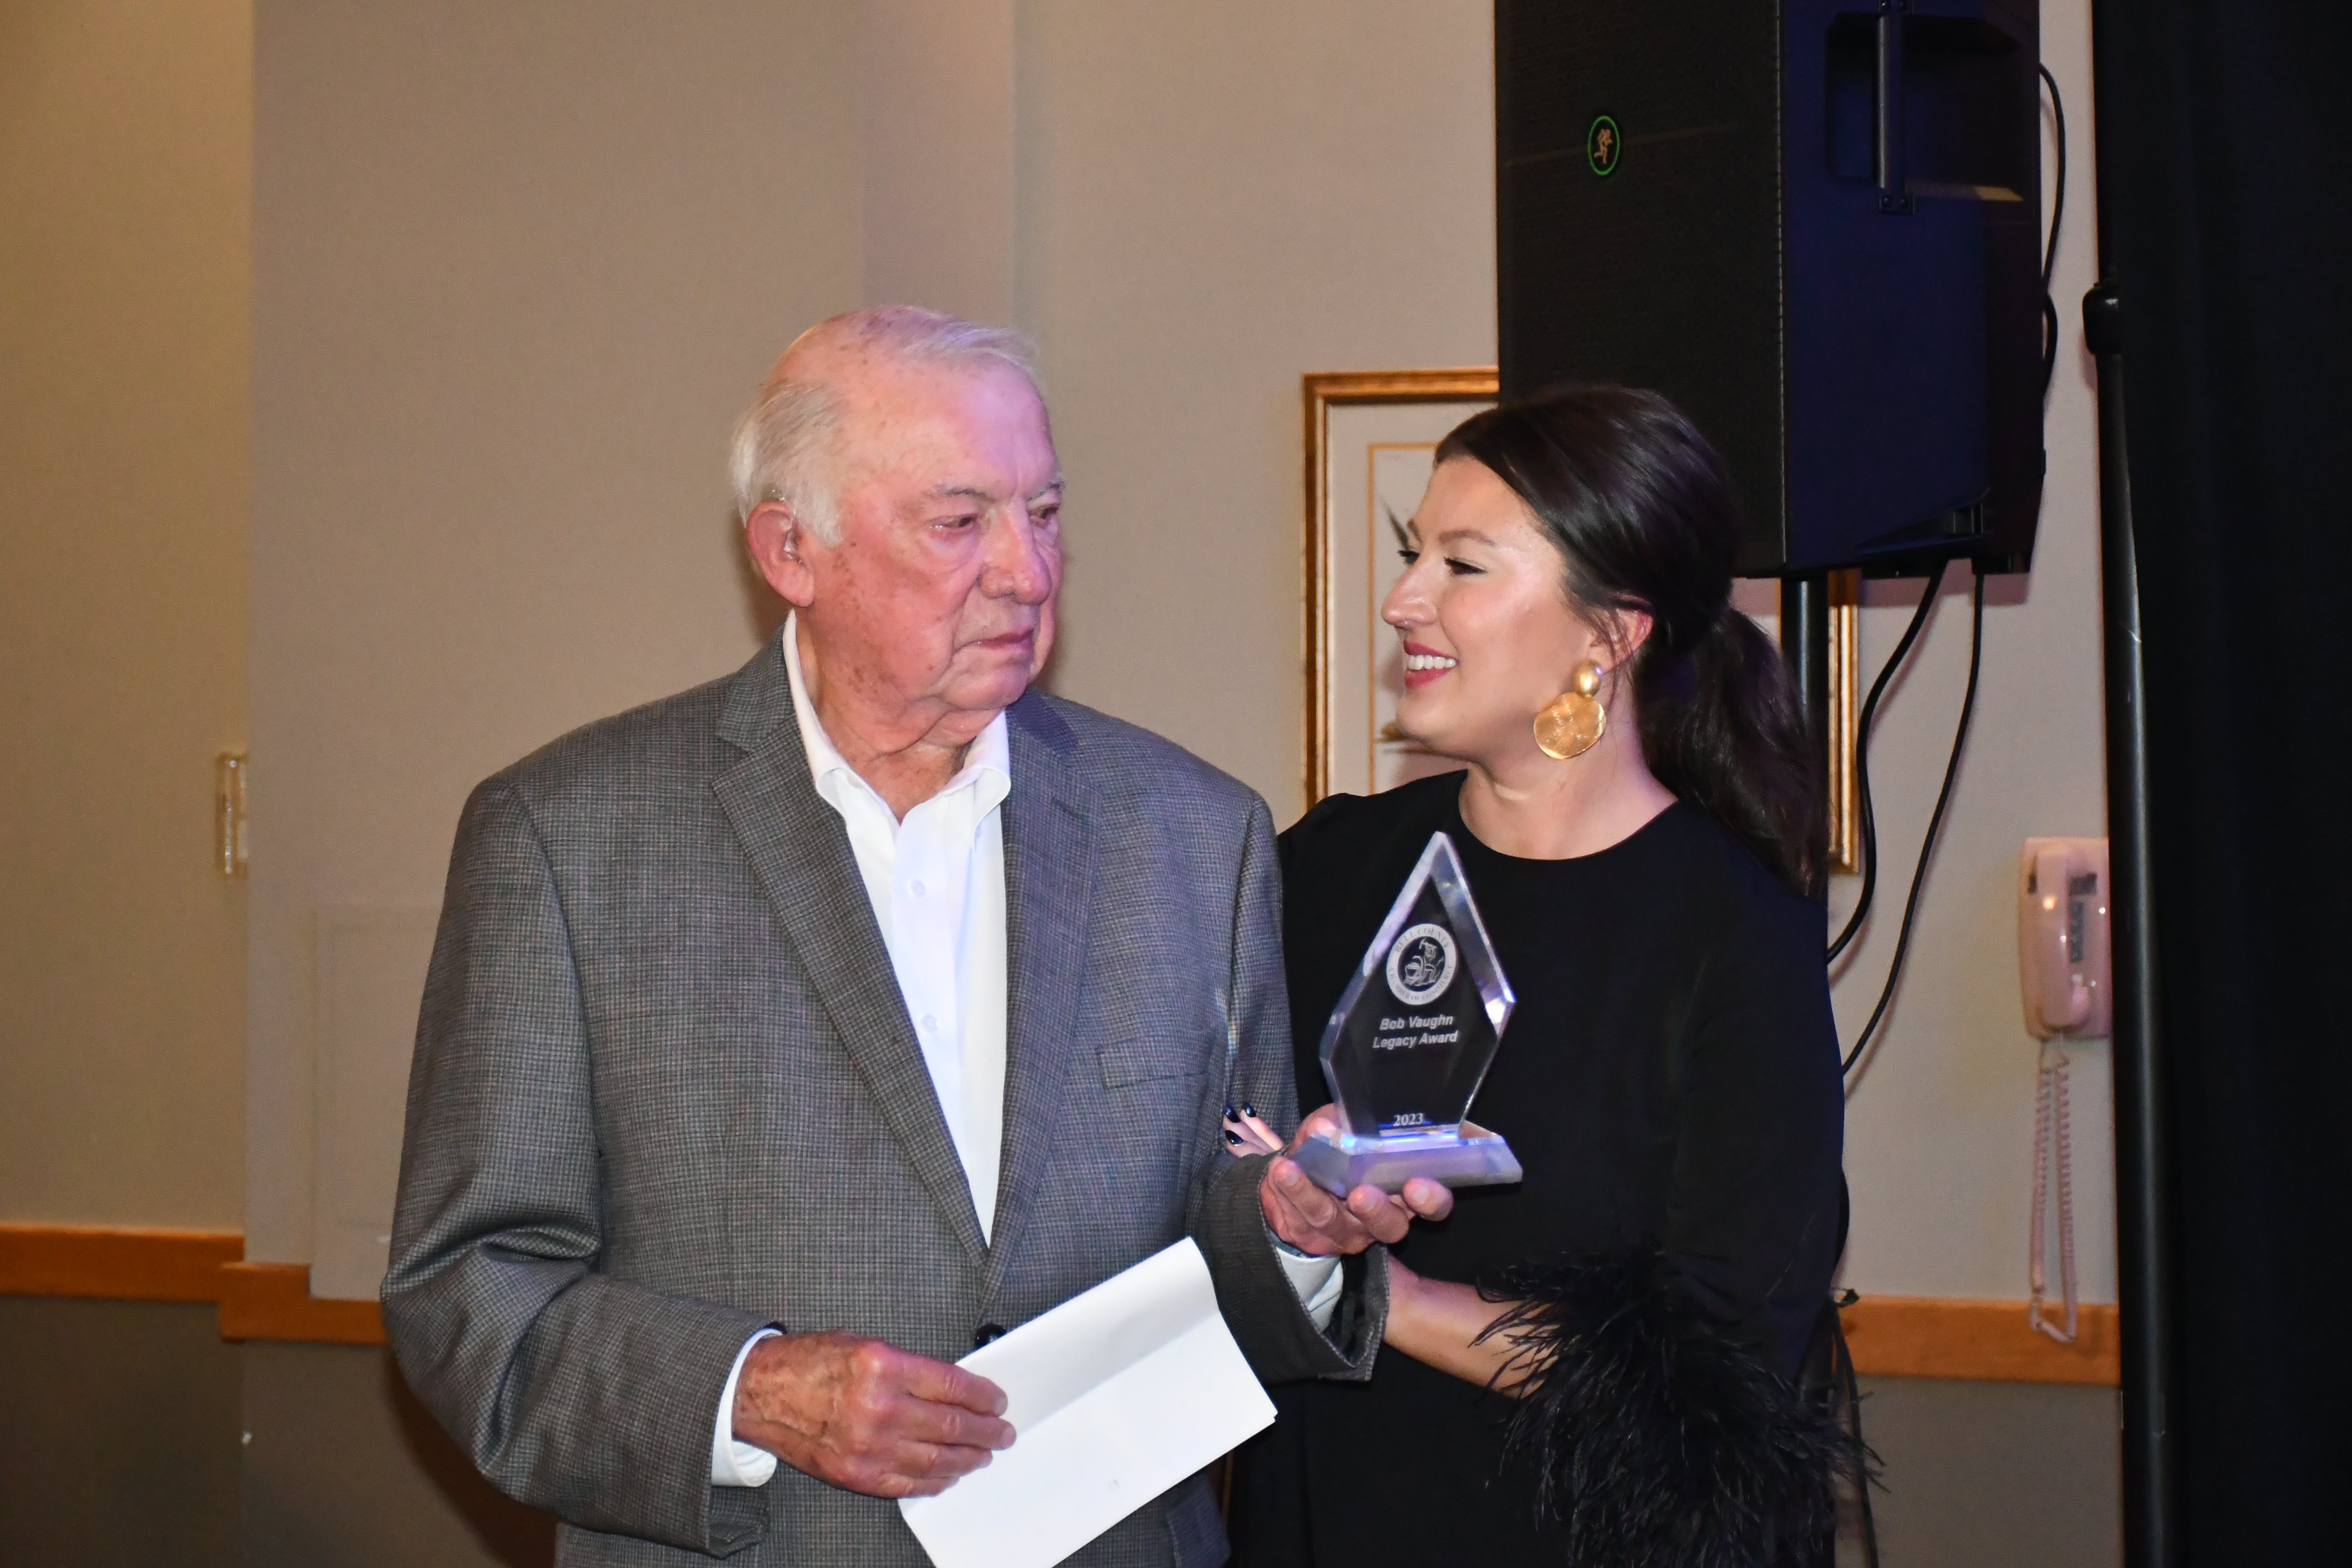 BOB VAUGHN LEGACY AWARD WINNER (BOB VAUGHN, LEFT) AND WITH BELL COUNTY  CHAMBER OF COMMERCE DIRECTOR MELISSA TURNER (RIGHT)